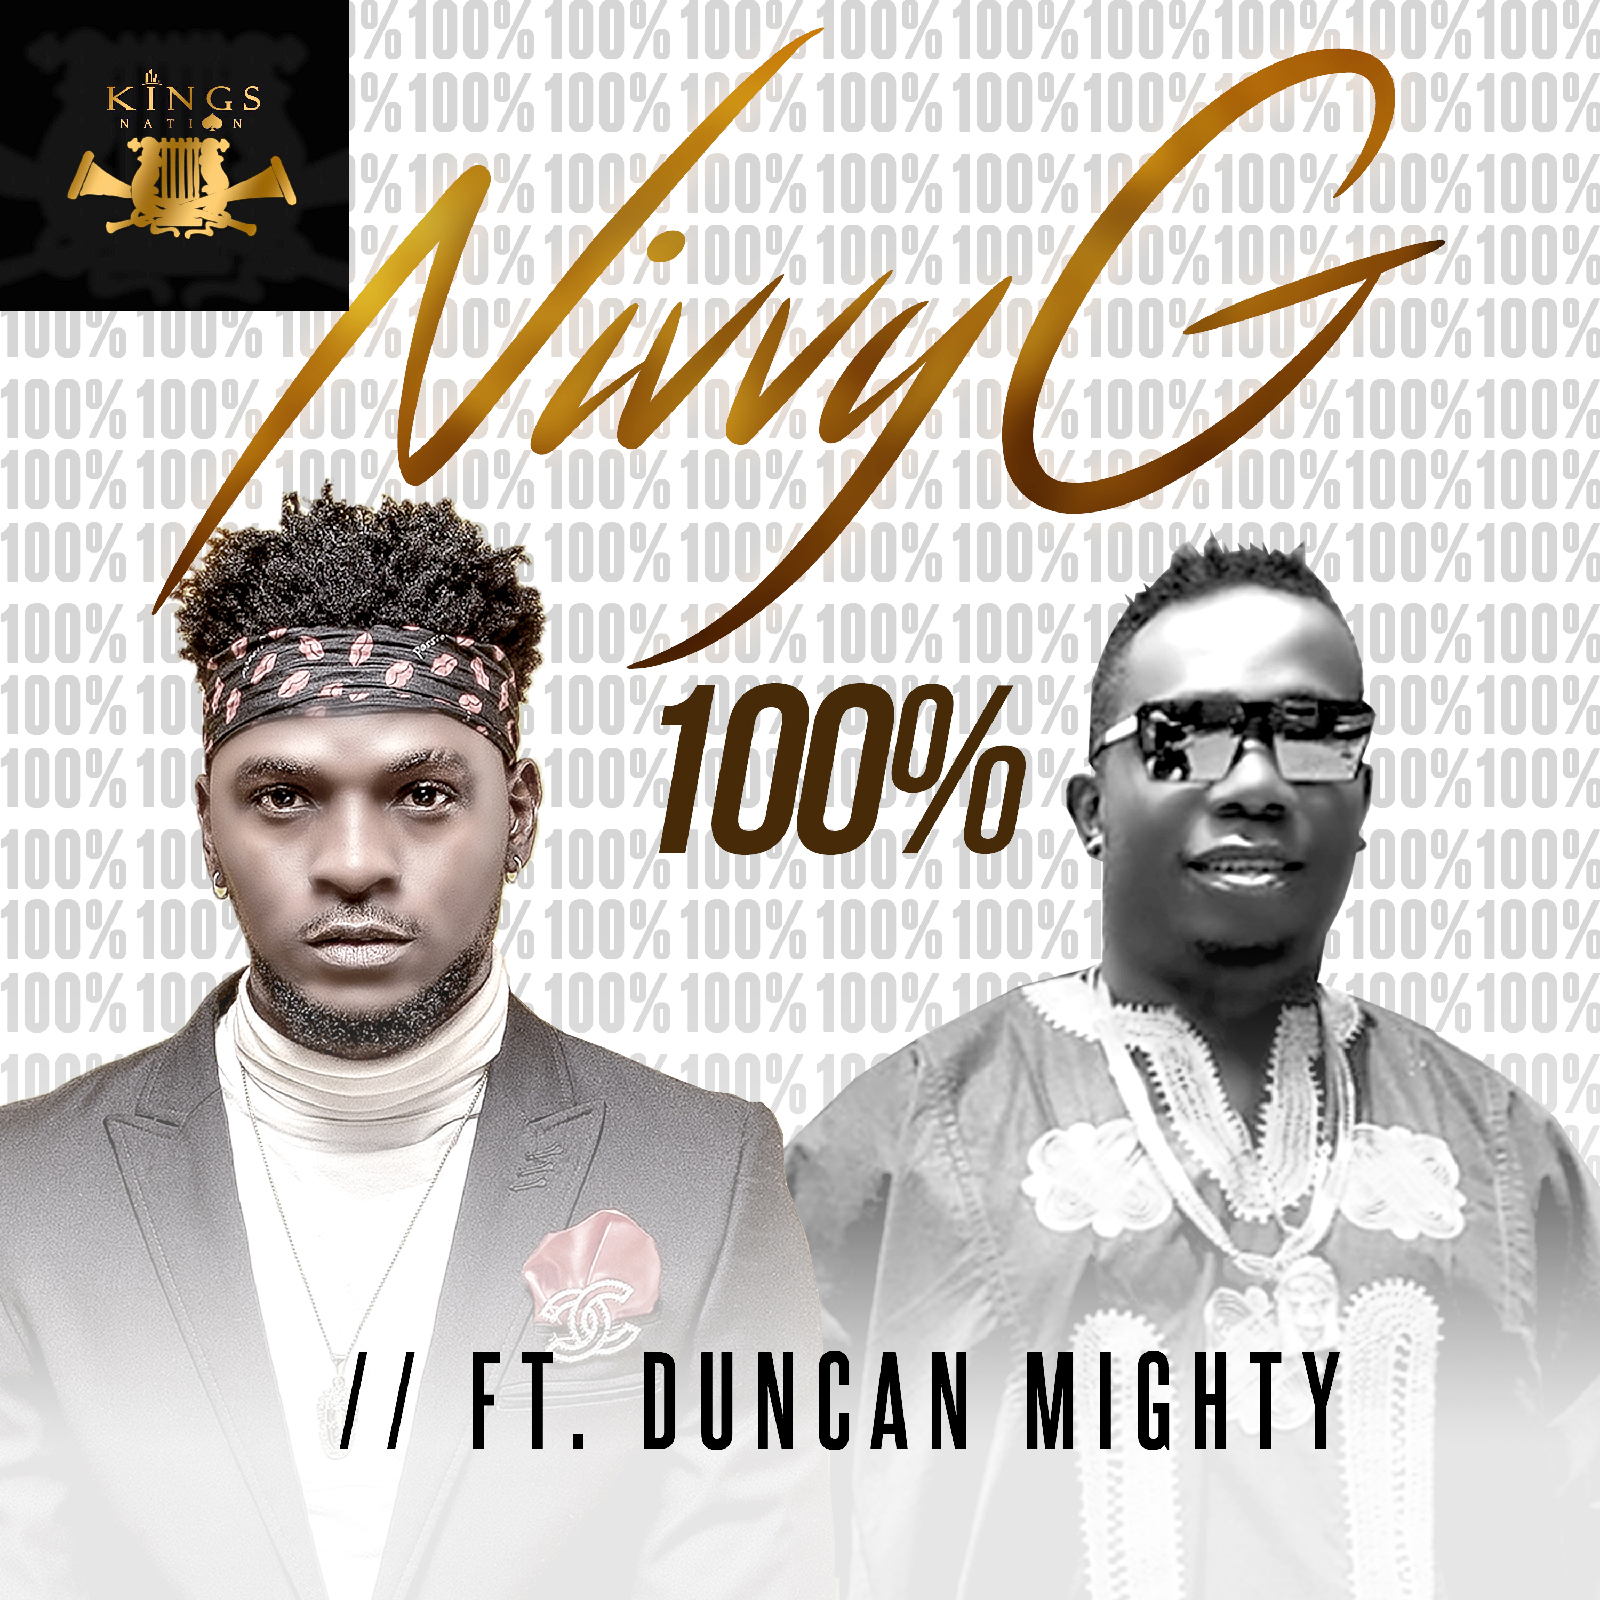 Nivvy G ft Duncan Mighty - 100%